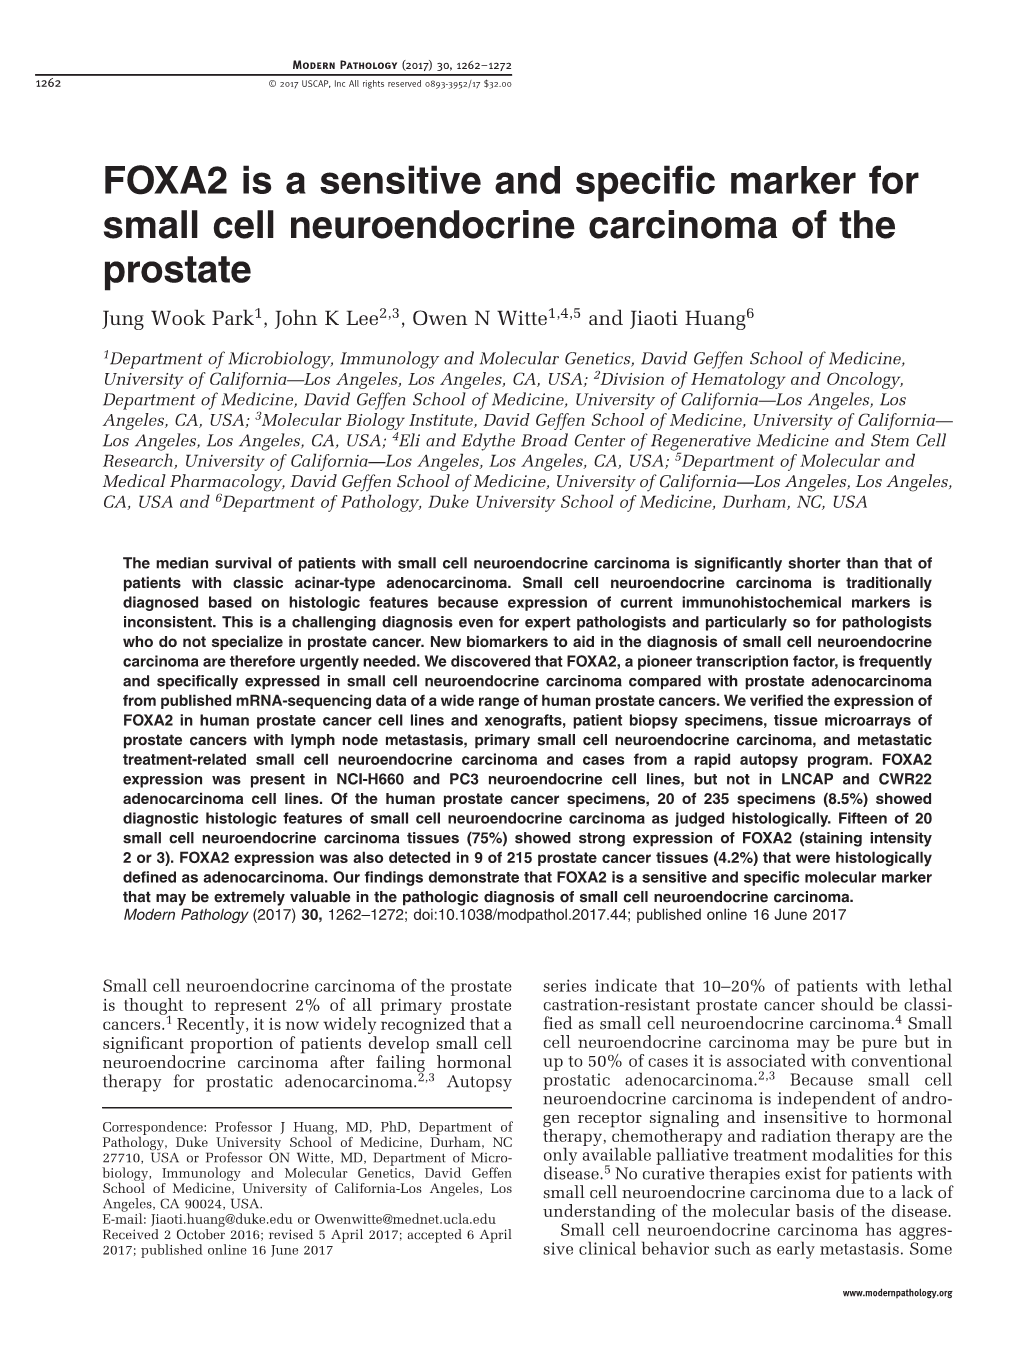 FOXA2 Is a Sensitive and Specific Marker for Small Cell Neuroendocrine Carcinoma of the Prostate Jung Wook Park1, John K Lee2,3, Owen N Witte1,4,5 and Jiaoti Huang6